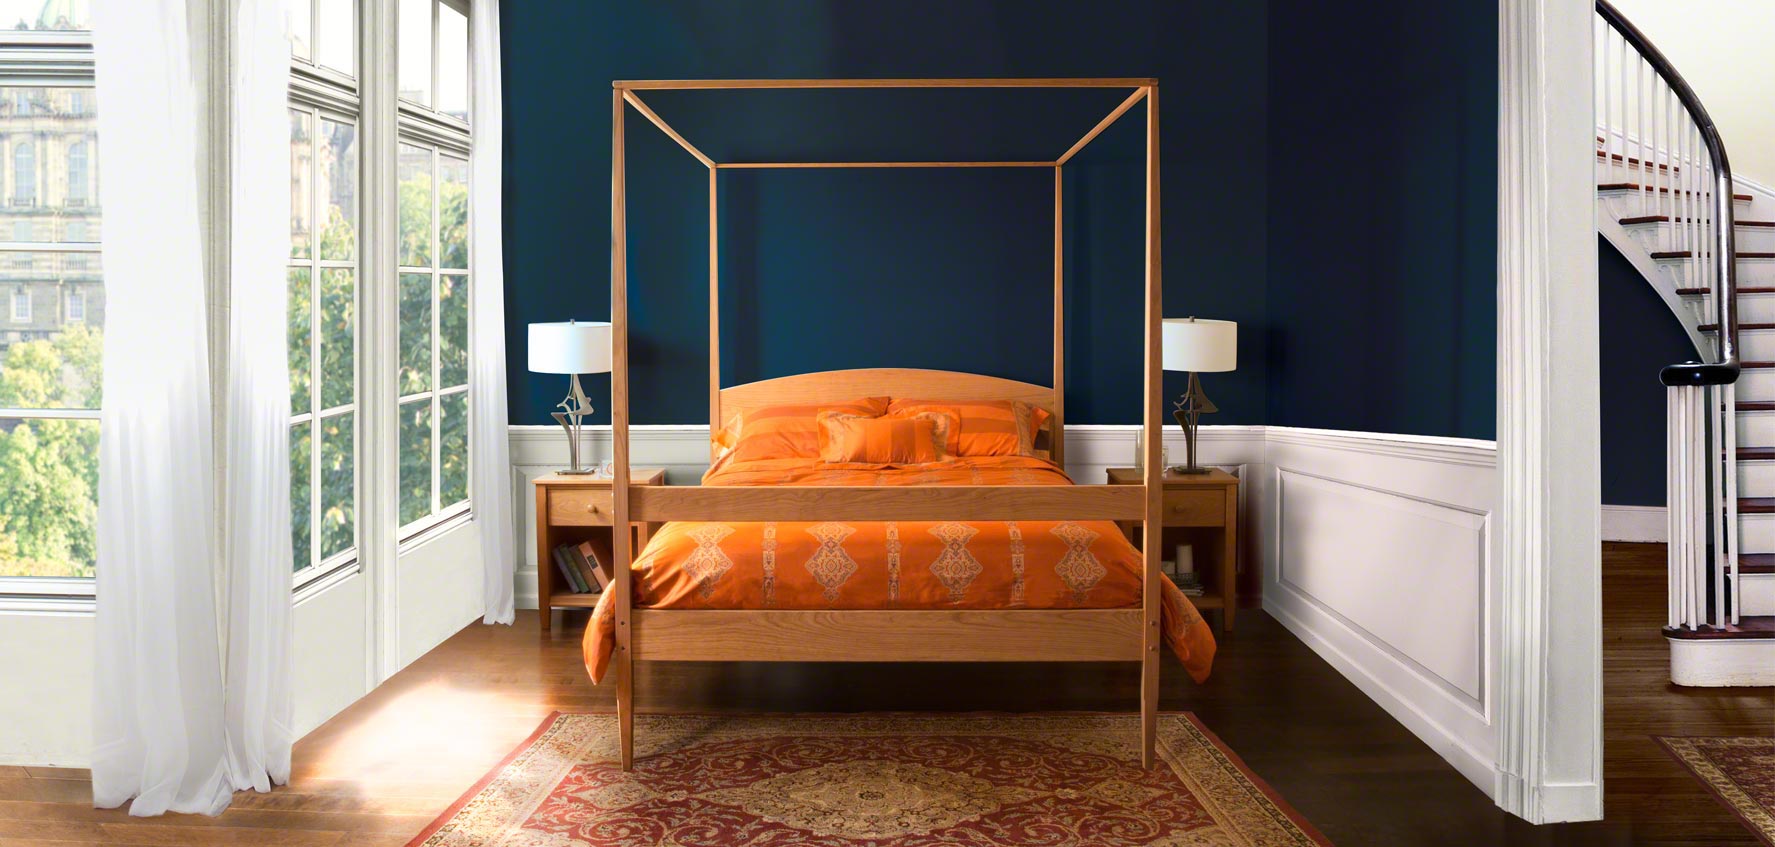 Shaker Bedroom Furniture | Award for Sustainably Harvested Wood